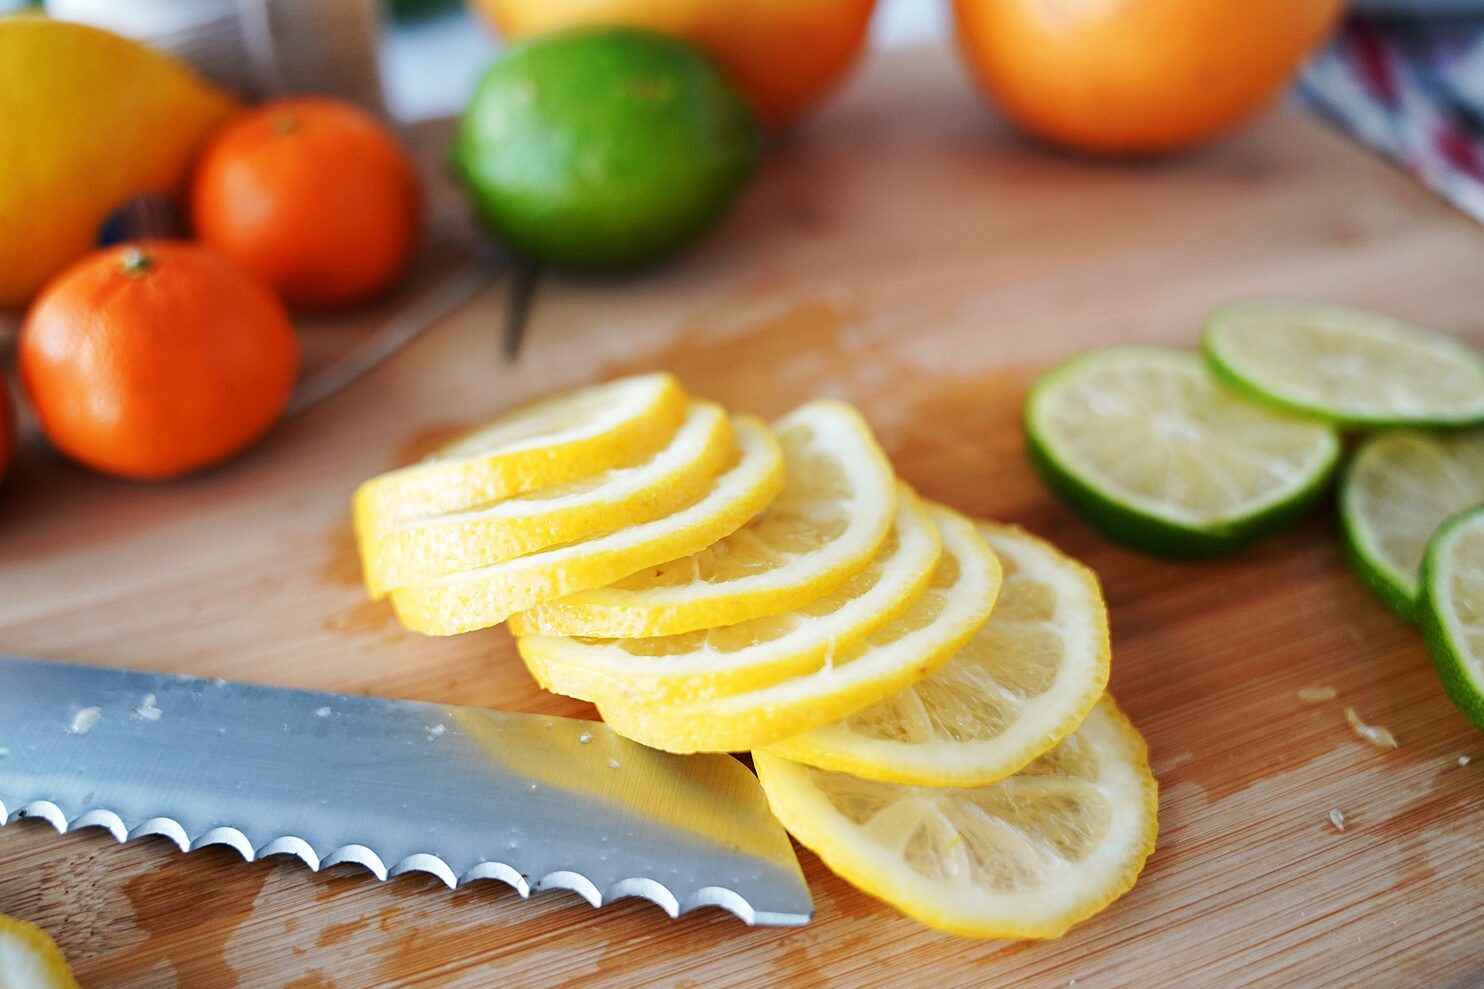 Round citrus slices on cutting board